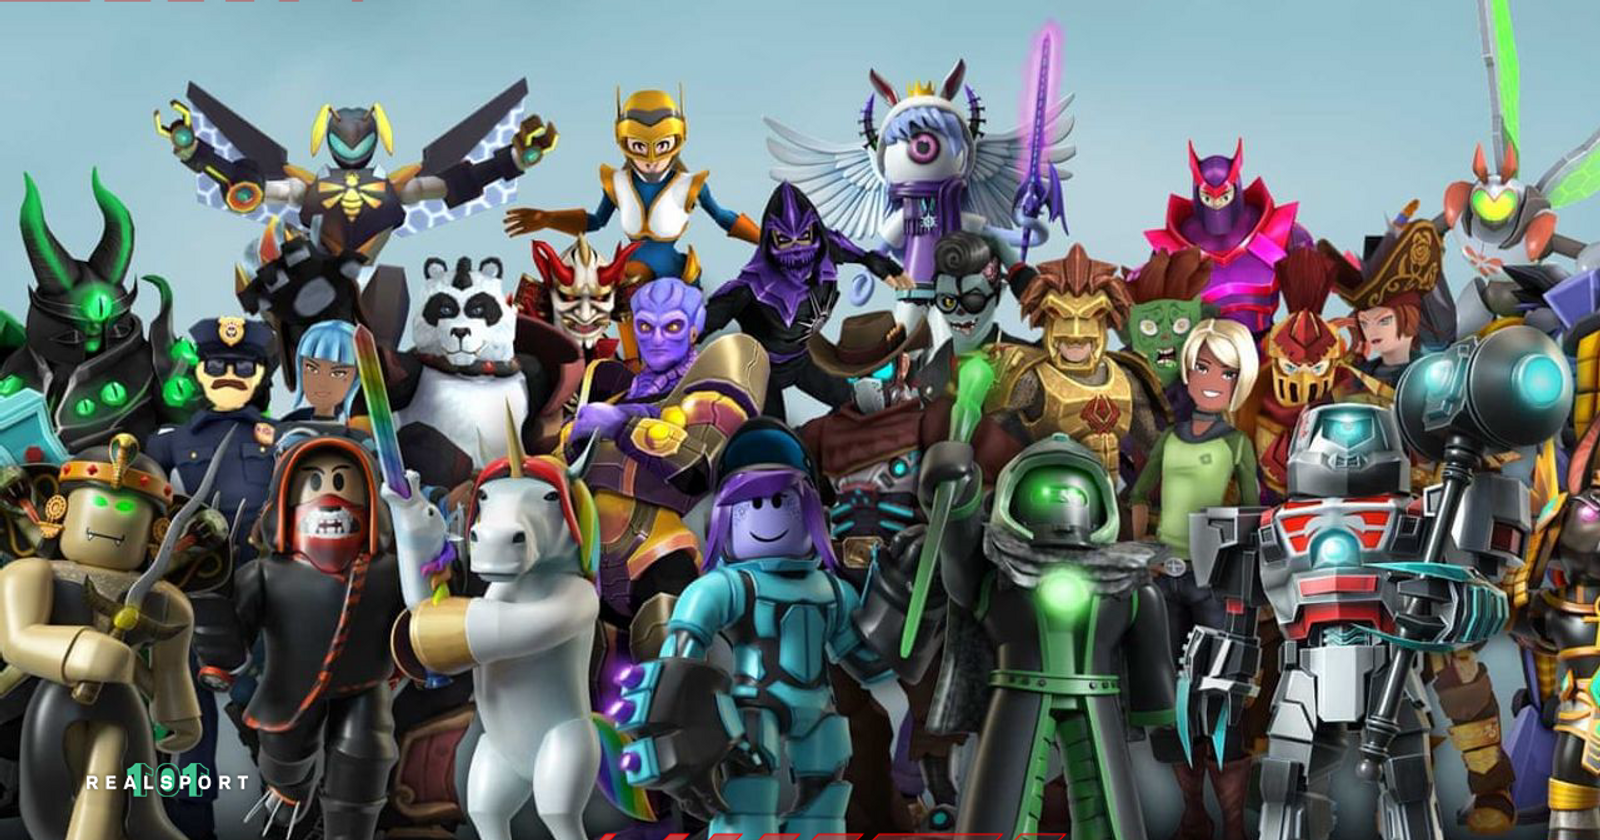 Roblox down: widespread server outage affects millions of players